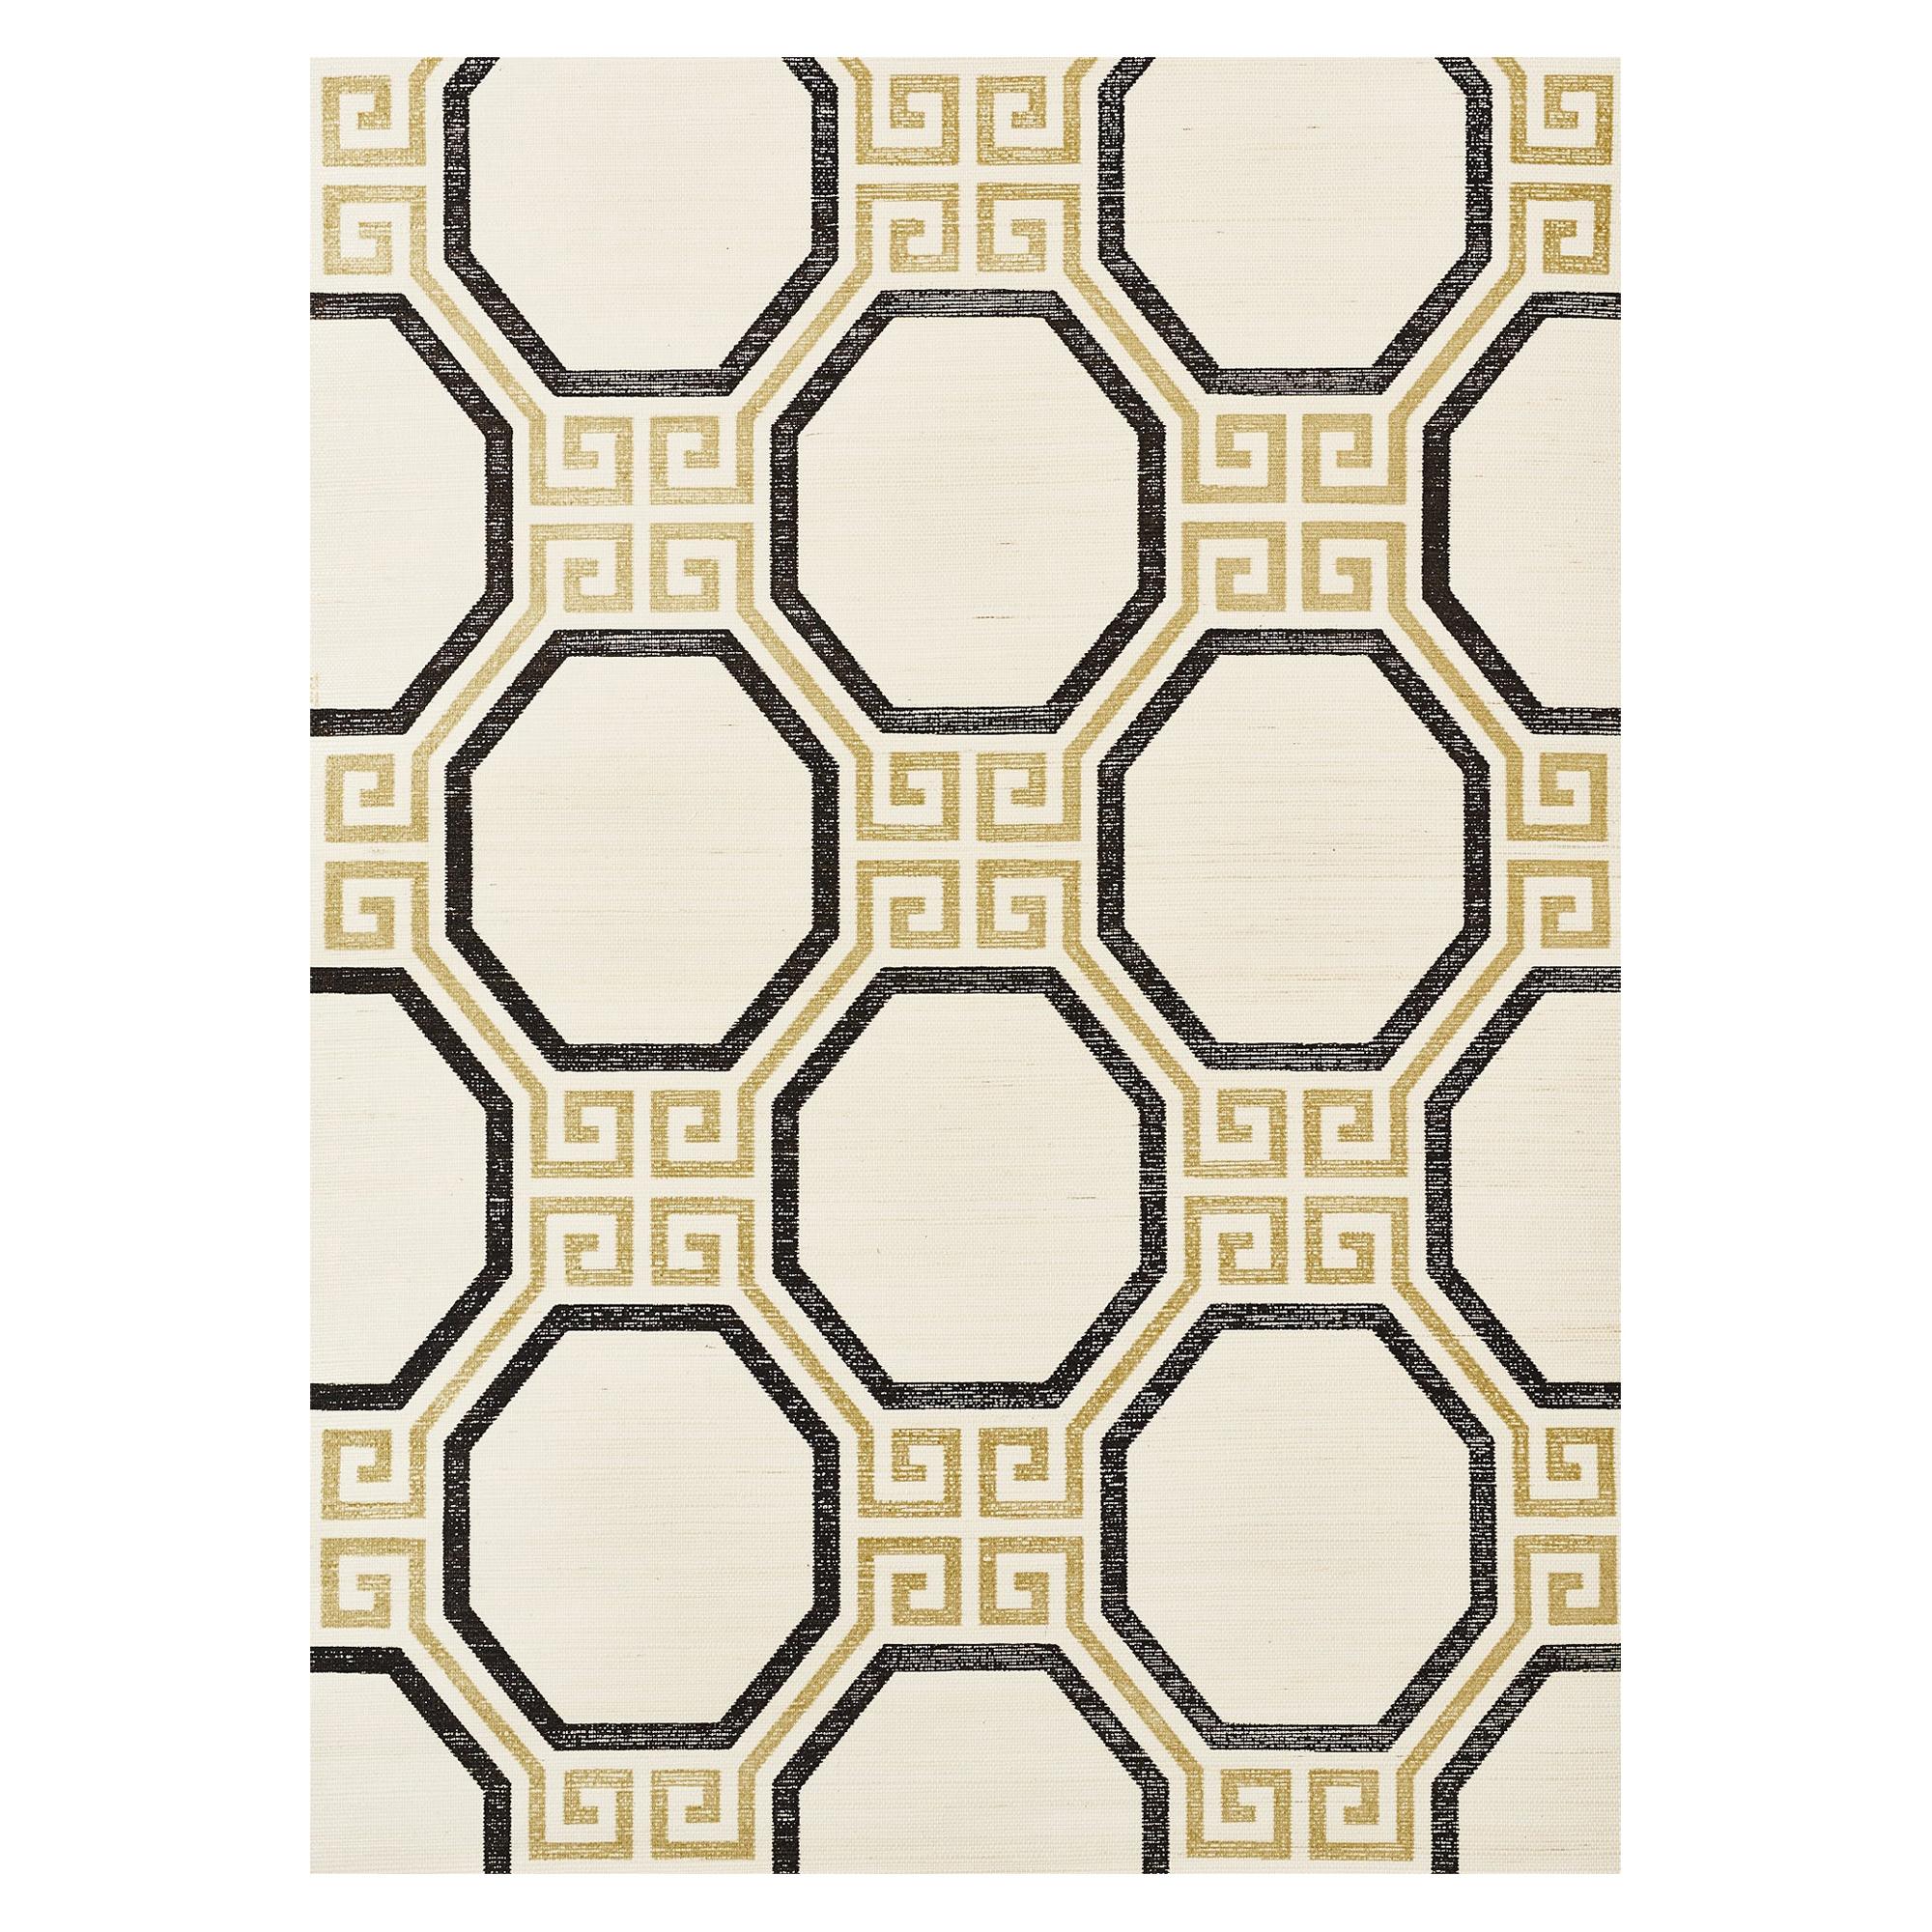 Schumacher Octavia Sisal Wallpaper in Gold and Jet For Sale